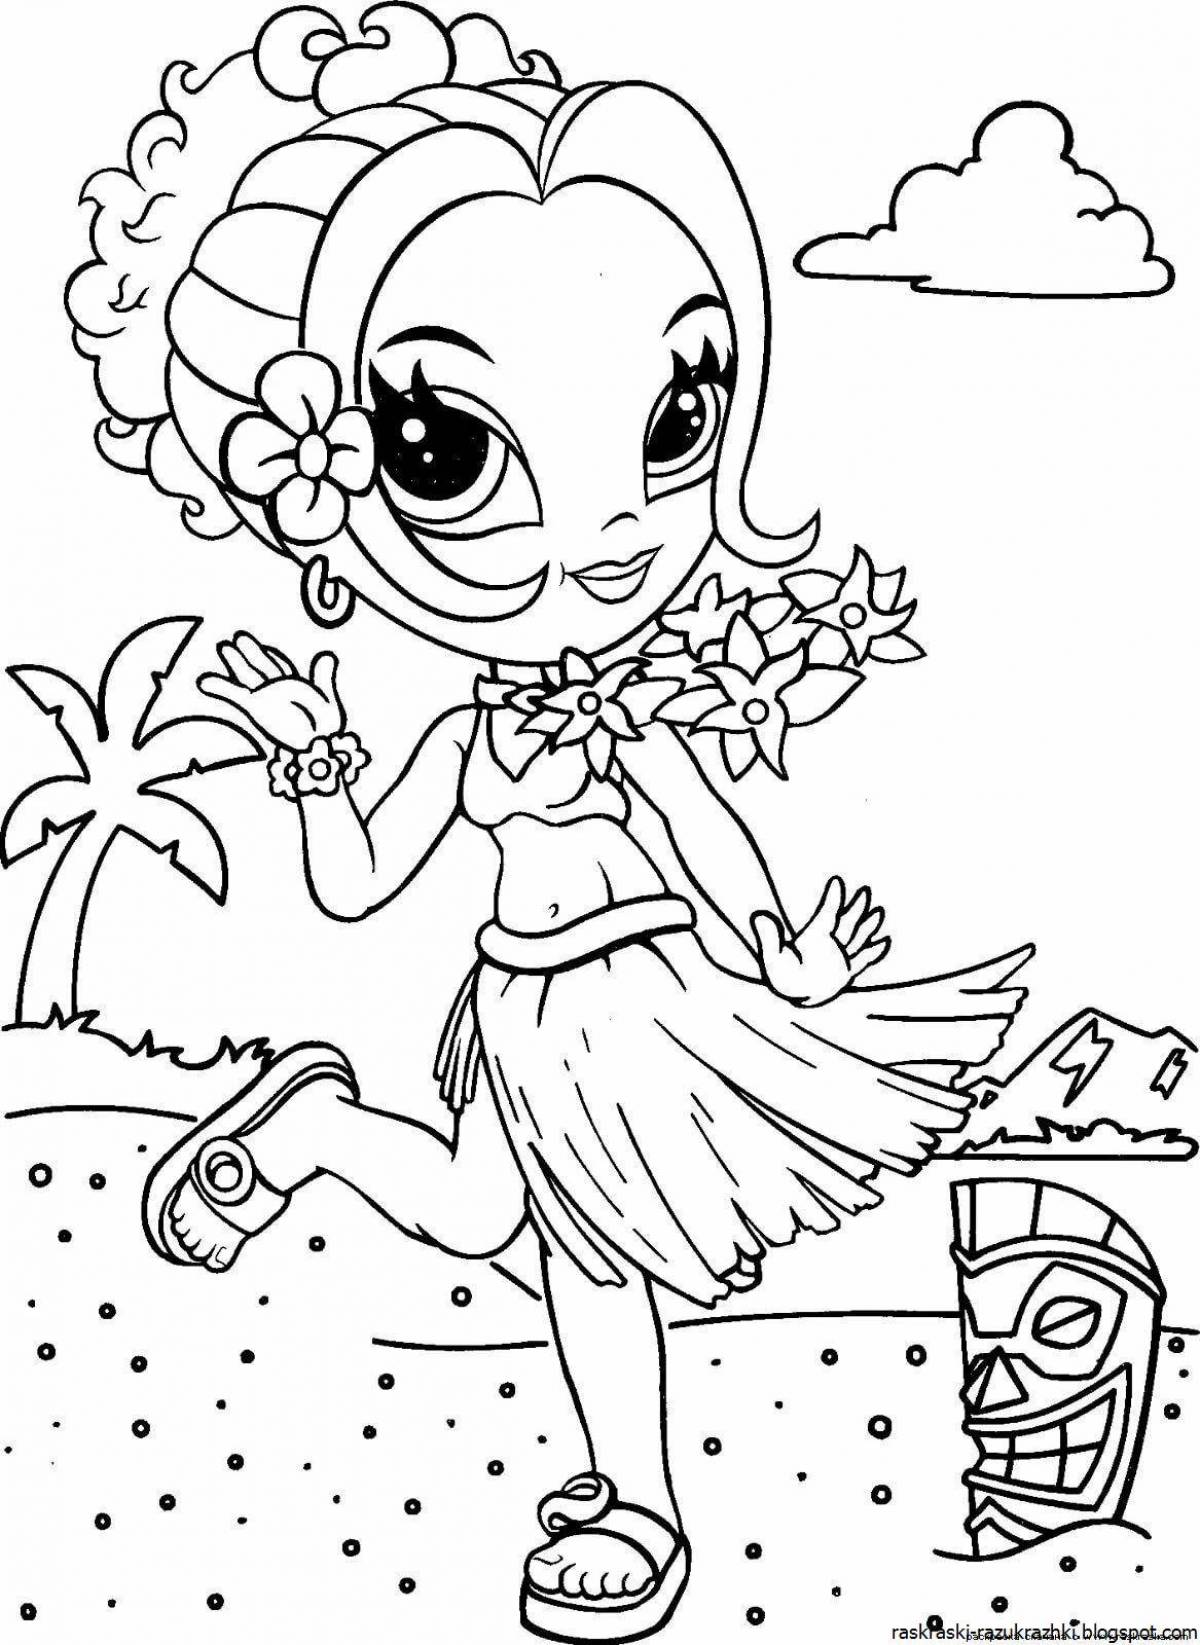 Coloring for girls #6